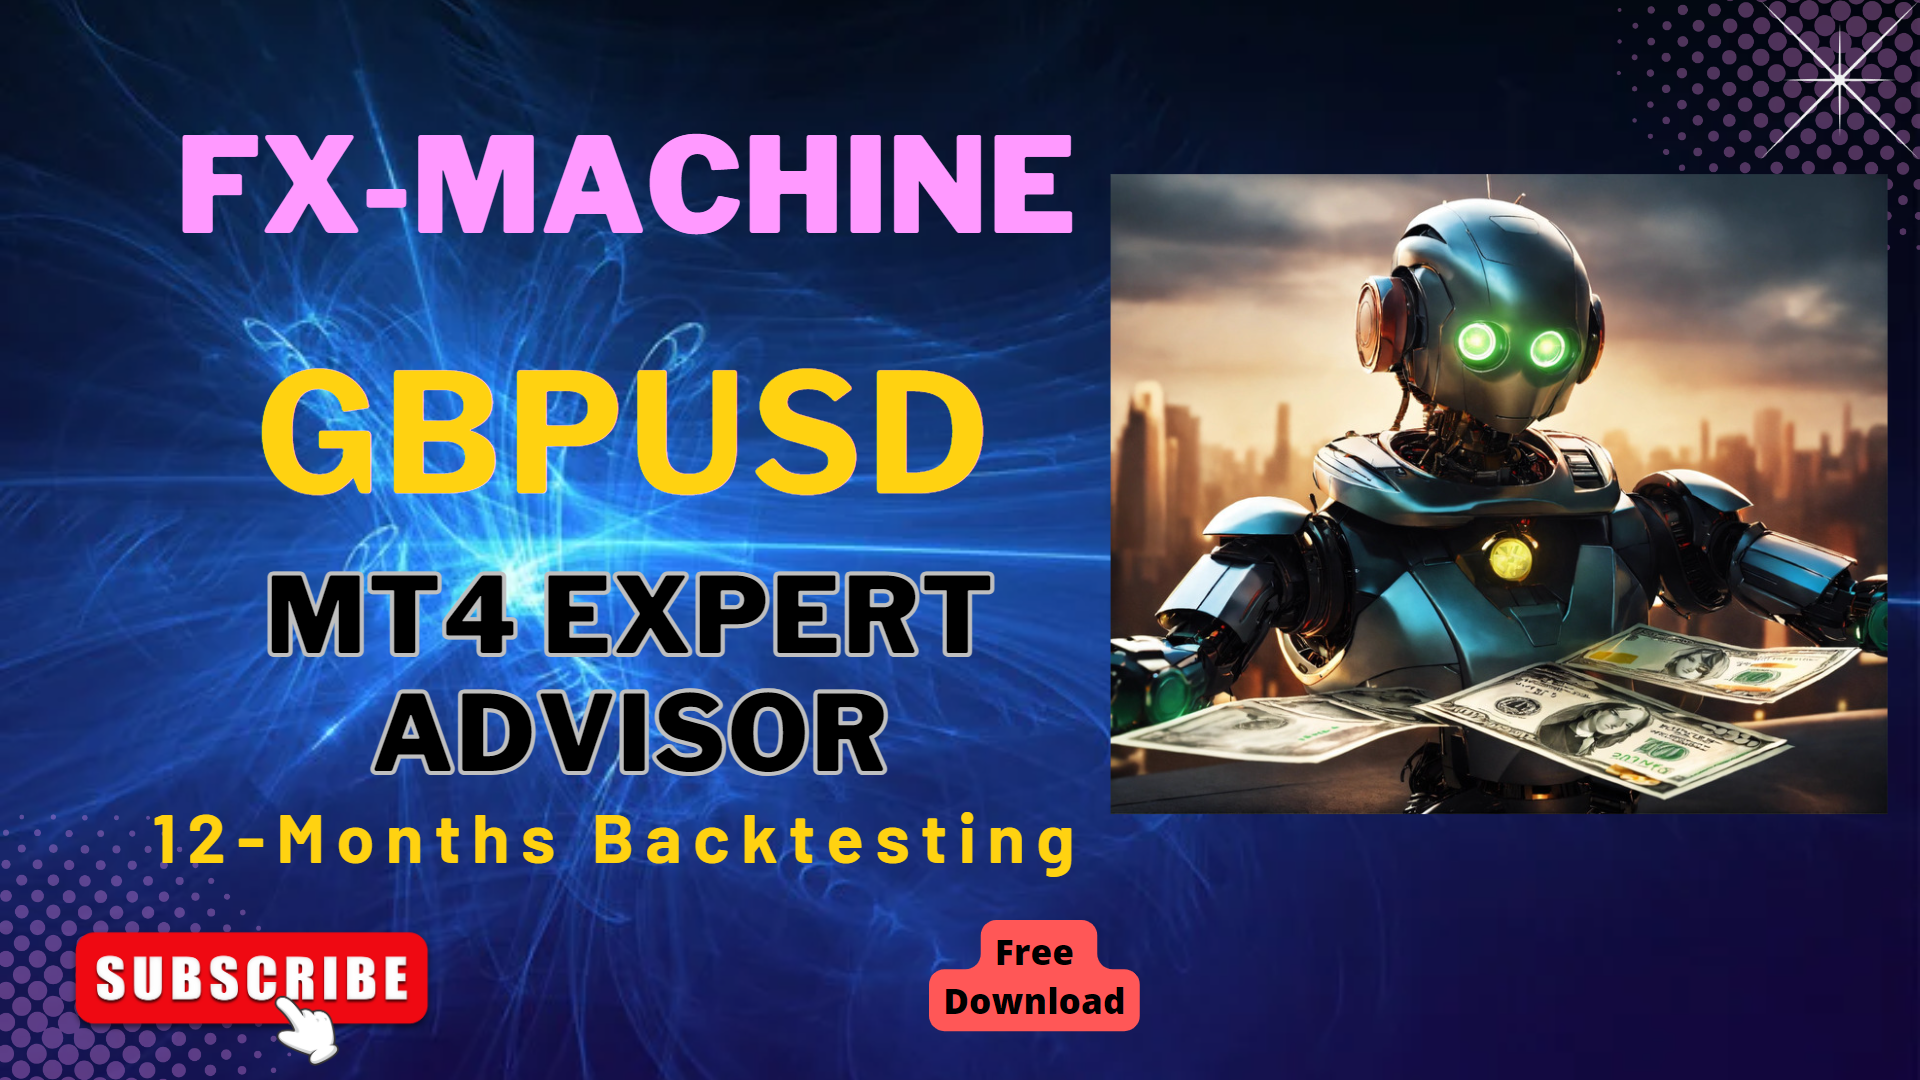 FxMachine Expert Advisor MT4 | Sharing Backtesting Results | Algo Forex Trading | Free Download